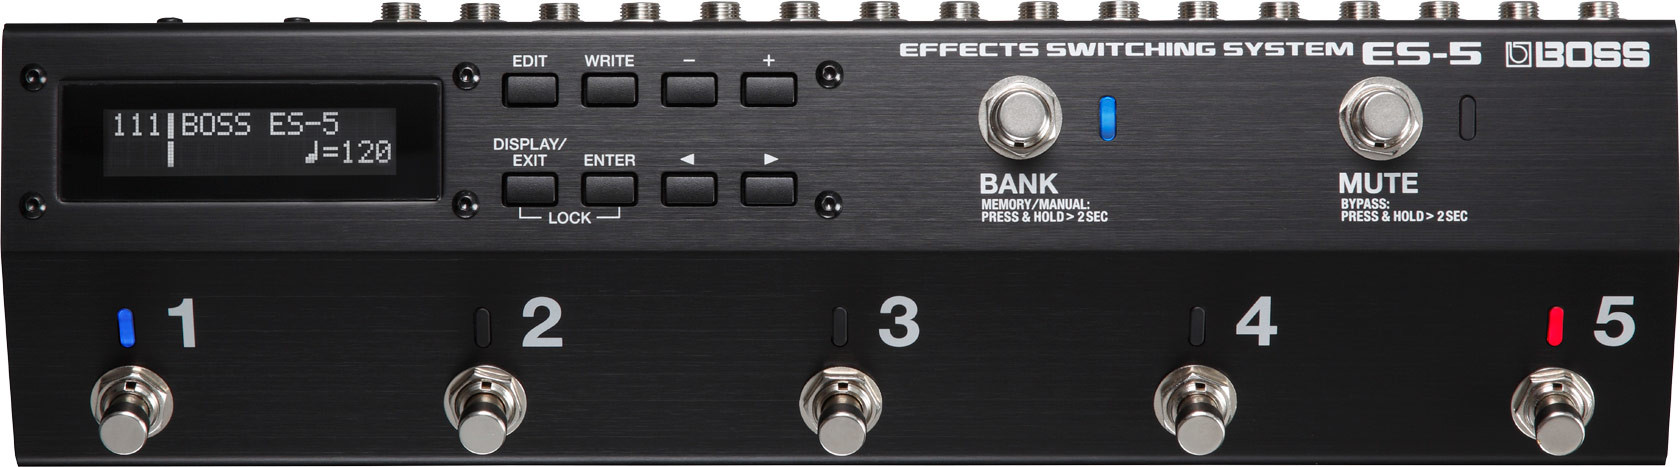 Boss ES-5 - EFFECTS SWITCHING SYSTEM